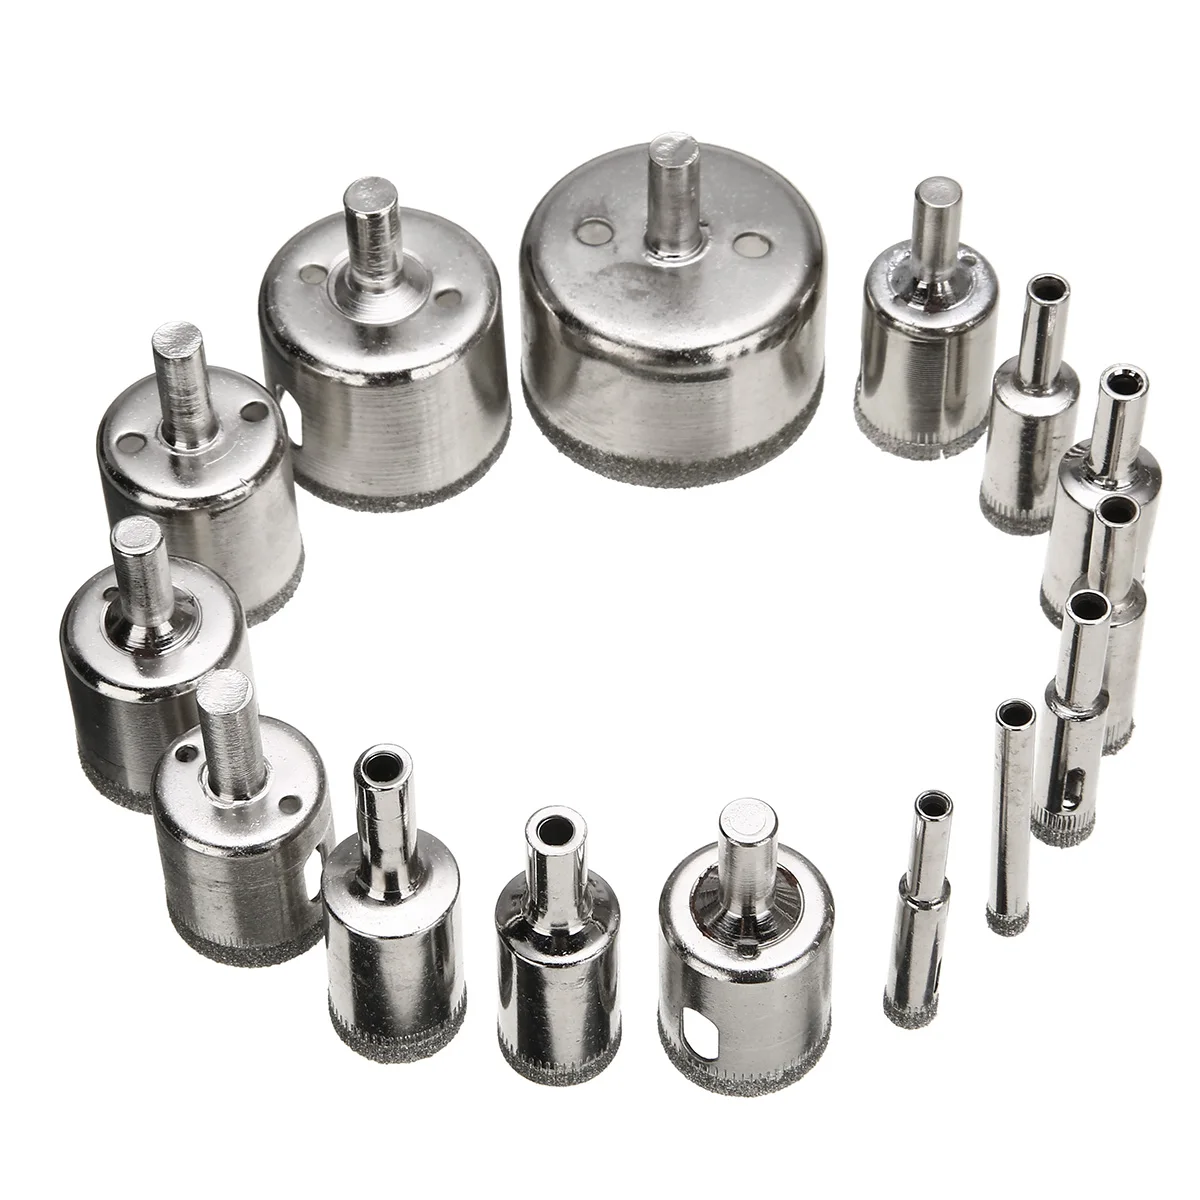 15pcs High Quality Hole Saw Drills Diamond Coated Drill Bits Set Tile Marble Glass Ceramic Hole Saw Tools Accessories 6mm-50mm